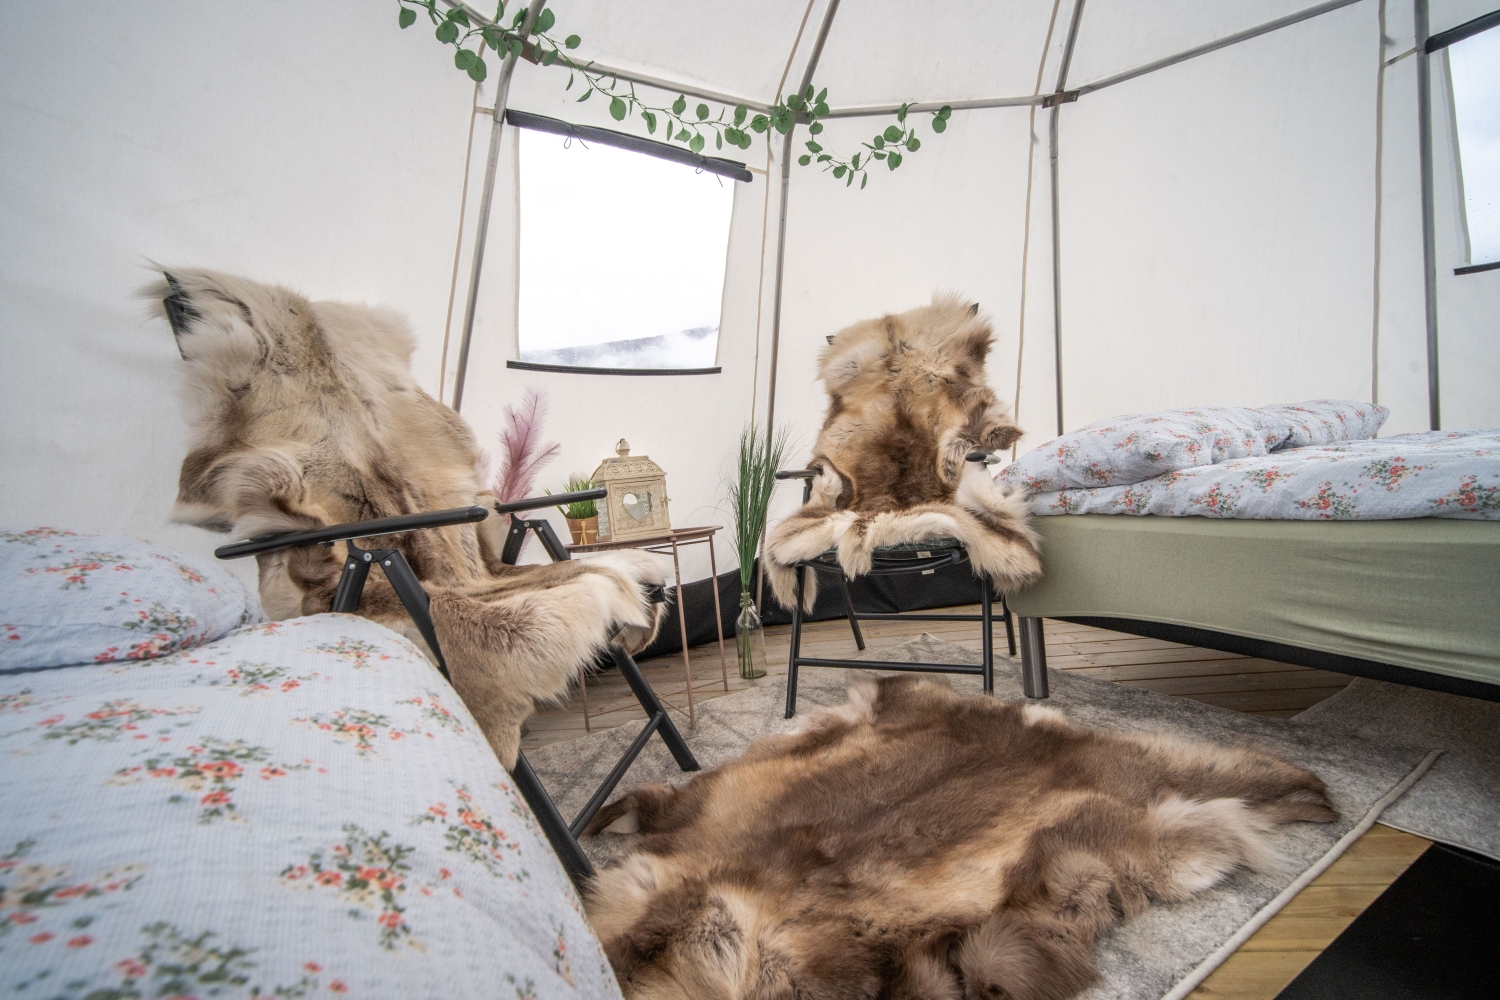 Inside traditional Saami tent